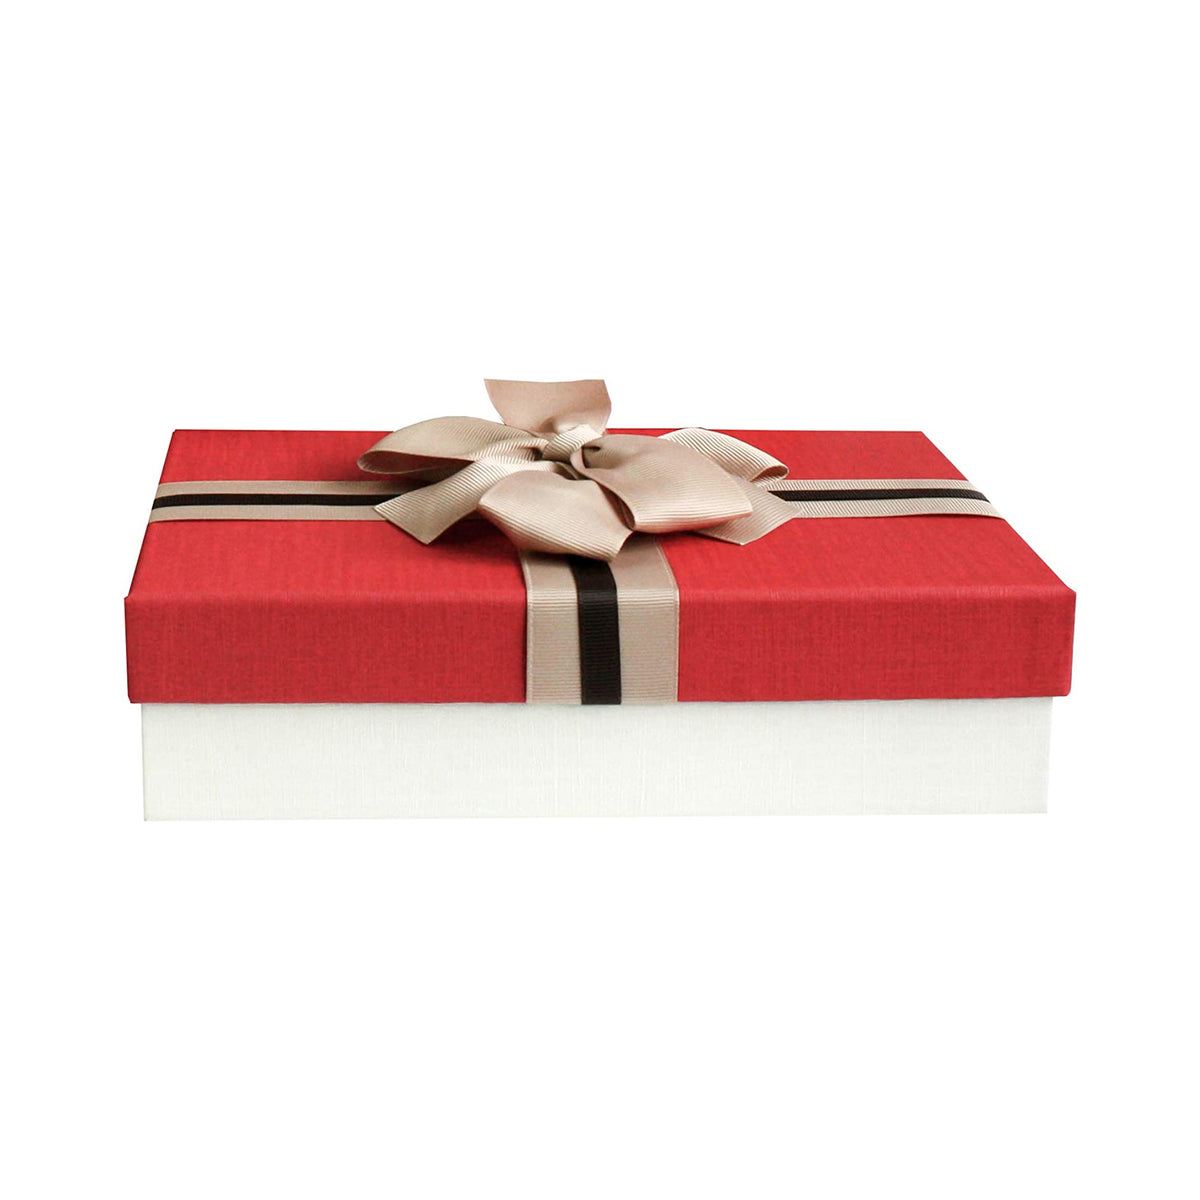 Single Cream/Red Gift Boxes With Brown Satin Ribbon (Sizes Available)